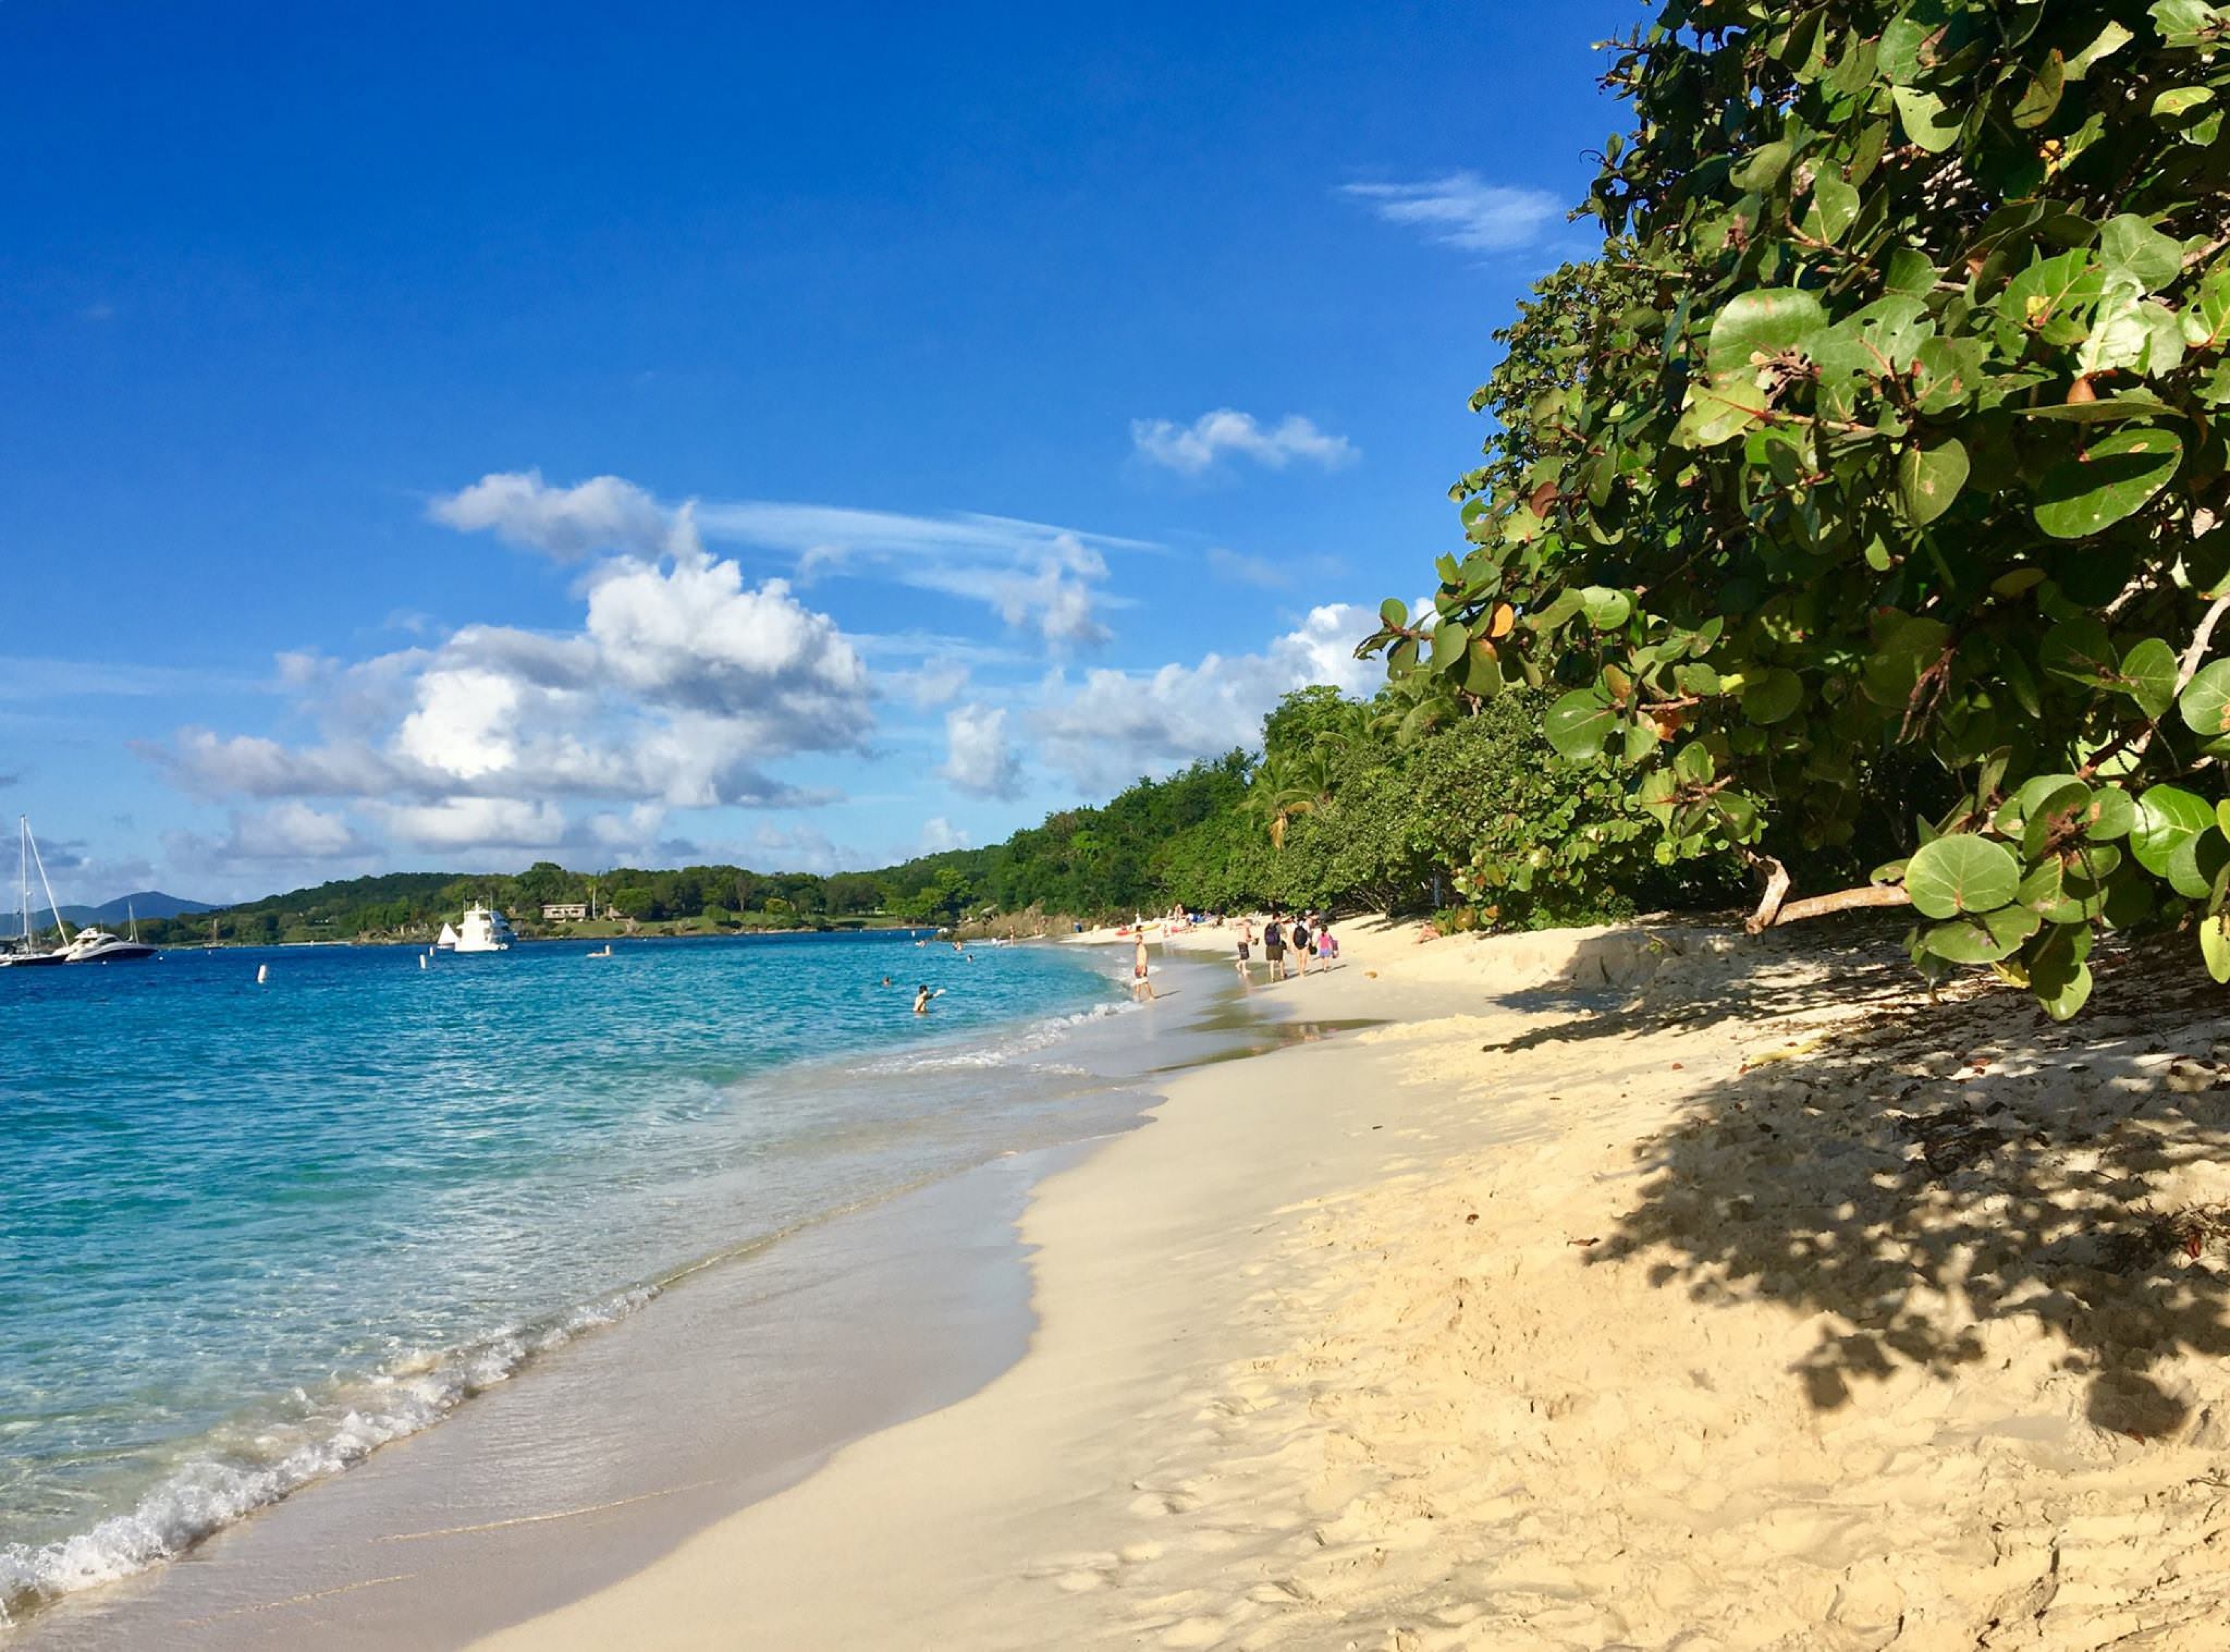 The Virgin Islands offer many swimming opportunities.